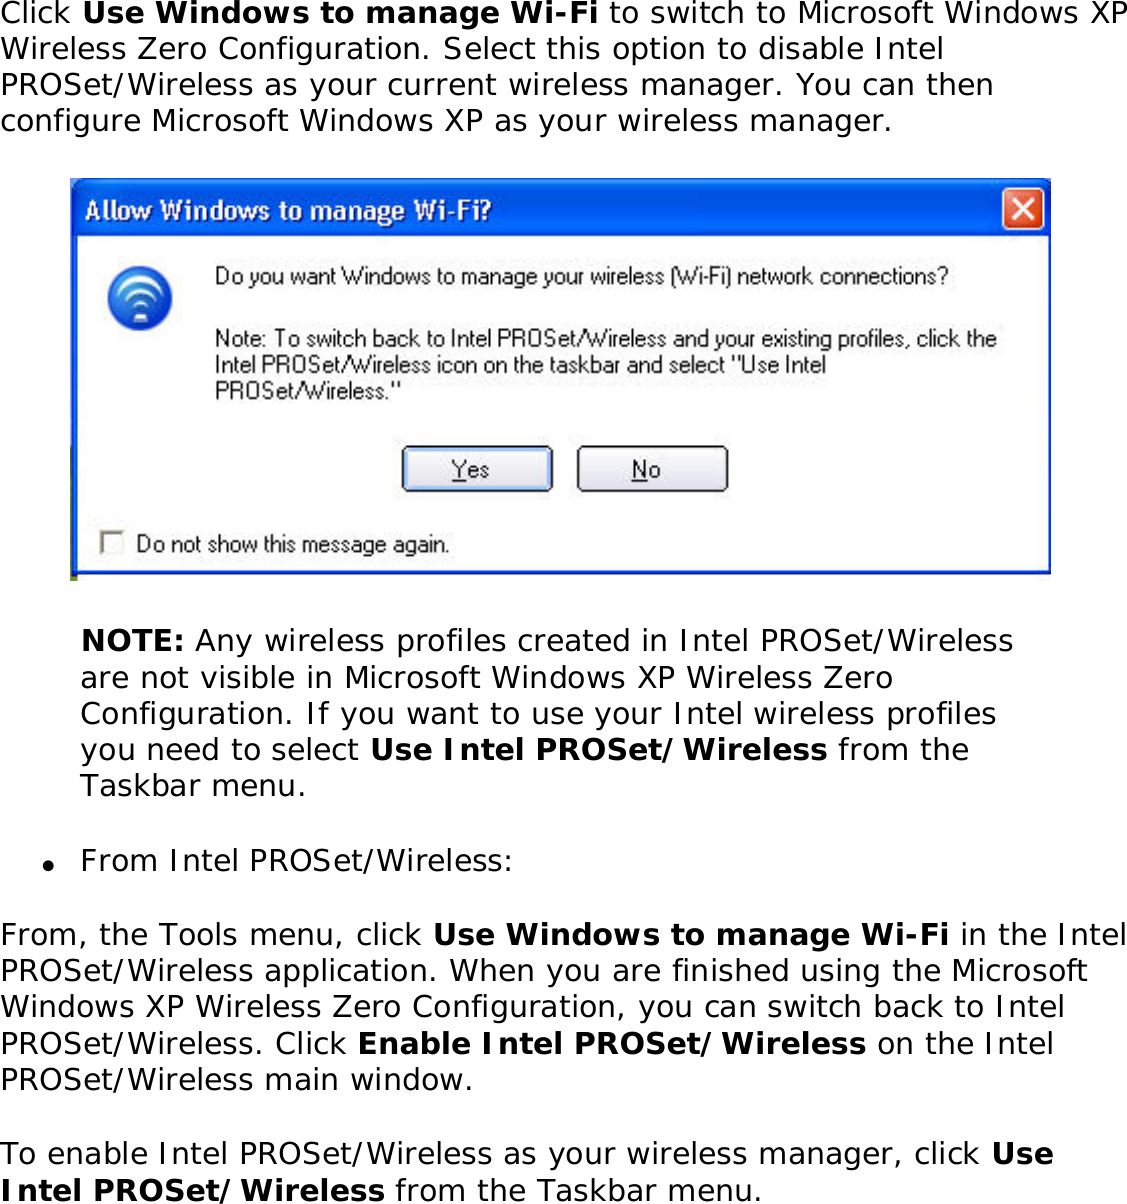 Click Use Windows to manage Wi-Fi to switch to Microsoft Windows XP Wireless Zero Configuration. Select this option to disable Intel PROSet/Wireless as your current wireless manager. You can then configure Microsoft Windows XP as your wireless manager.  NOTE: Any wireless profiles created in Intel PROSet/Wireless are not visible in Microsoft Windows XP Wireless Zero Configuration. If you want to use your Intel wireless profiles you need to select Use Intel PROSet/Wireless from the Taskbar menu.●     From Intel PROSet/Wireless:From, the Tools menu, click Use Windows to manage Wi-Fi in the Intel PROSet/Wireless application. When you are finished using the Microsoft Windows XP Wireless Zero Configuration, you can switch back to Intel PROSet/Wireless. Click Enable Intel PROSet/Wireless on the Intel PROSet/Wireless main window. To enable Intel PROSet/Wireless as your wireless manager, click Use Intel PROSet/Wireless from the Taskbar menu. 